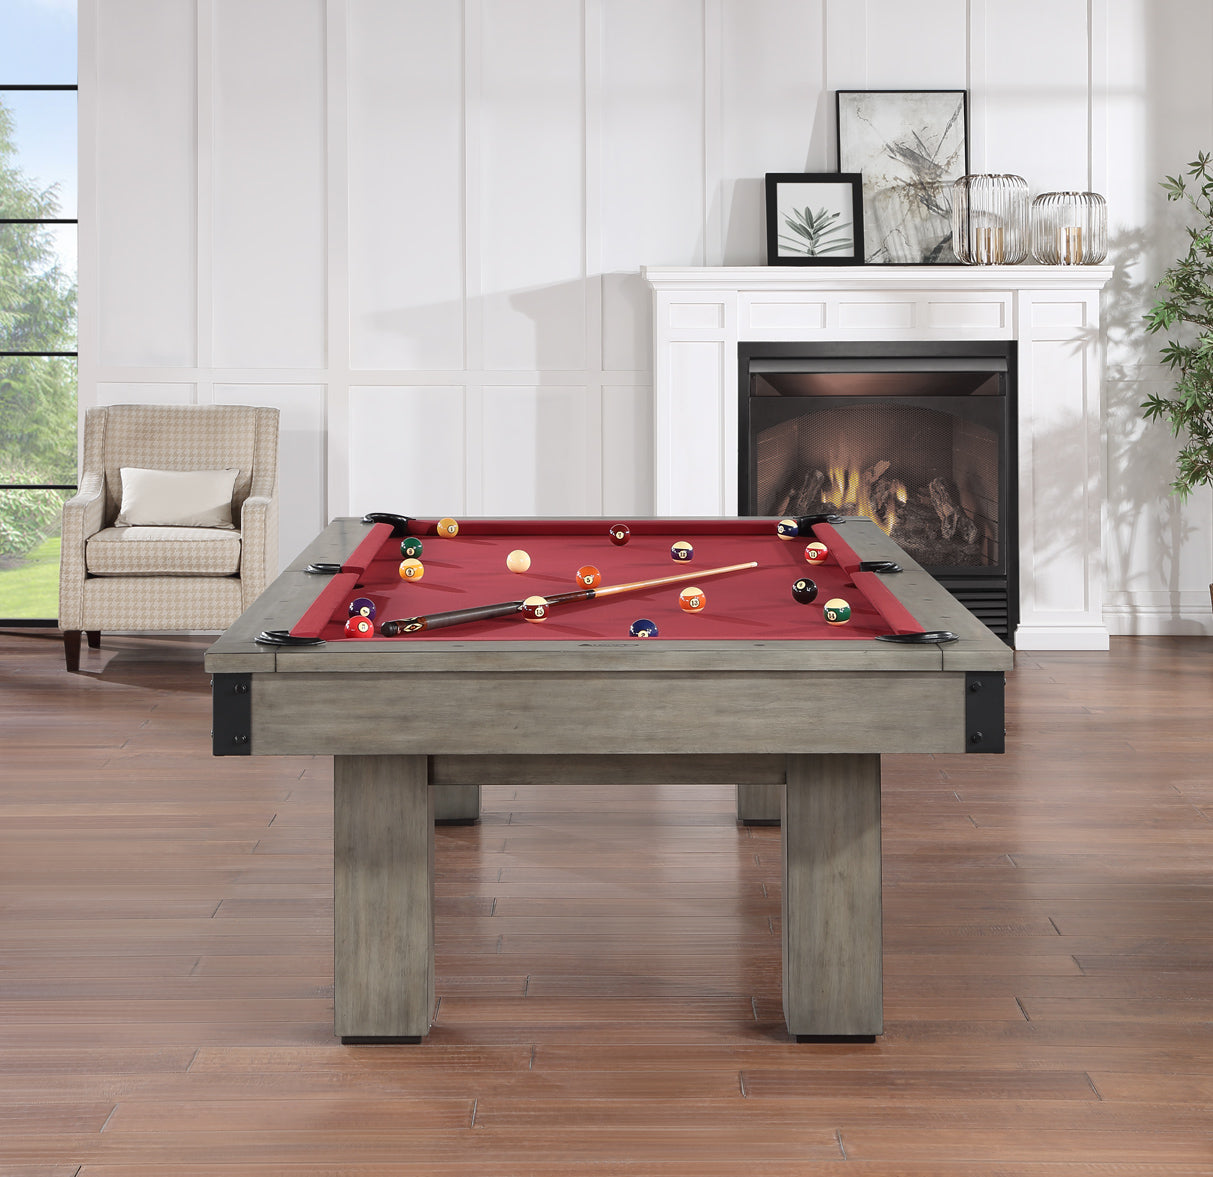 Legacy Billiards Colt II Pool Table in Overcast Finish with Legacy Red Cloth Modern Room Scene - End View